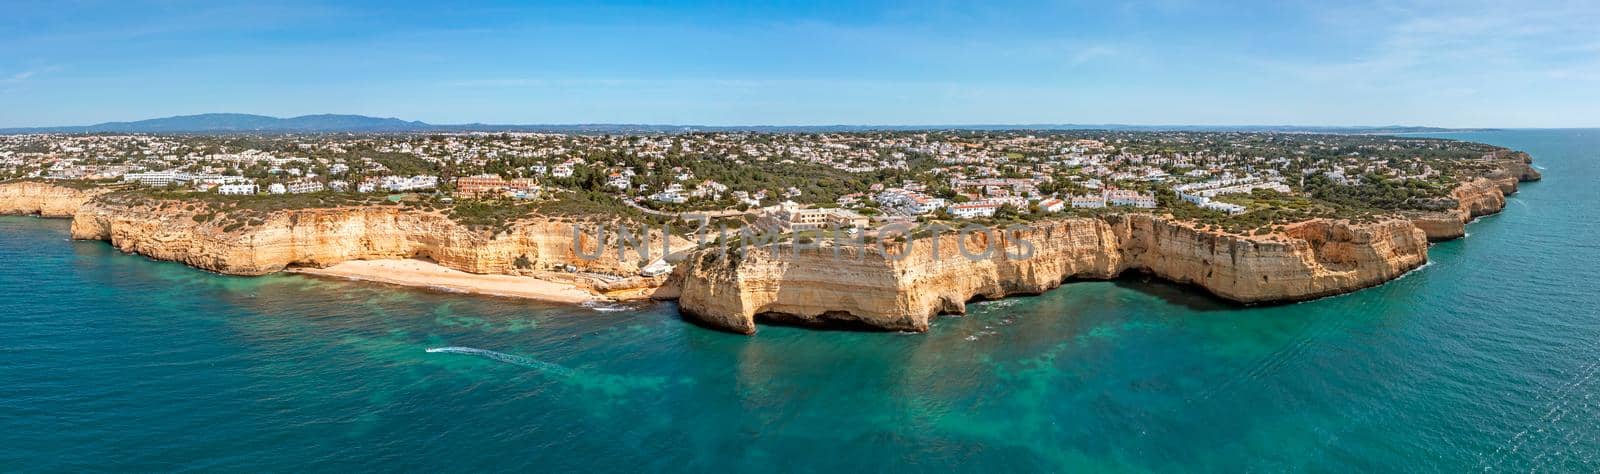 Aerial panorama from Praia do Vale de Centeanes in the Algarve Portugal by devy